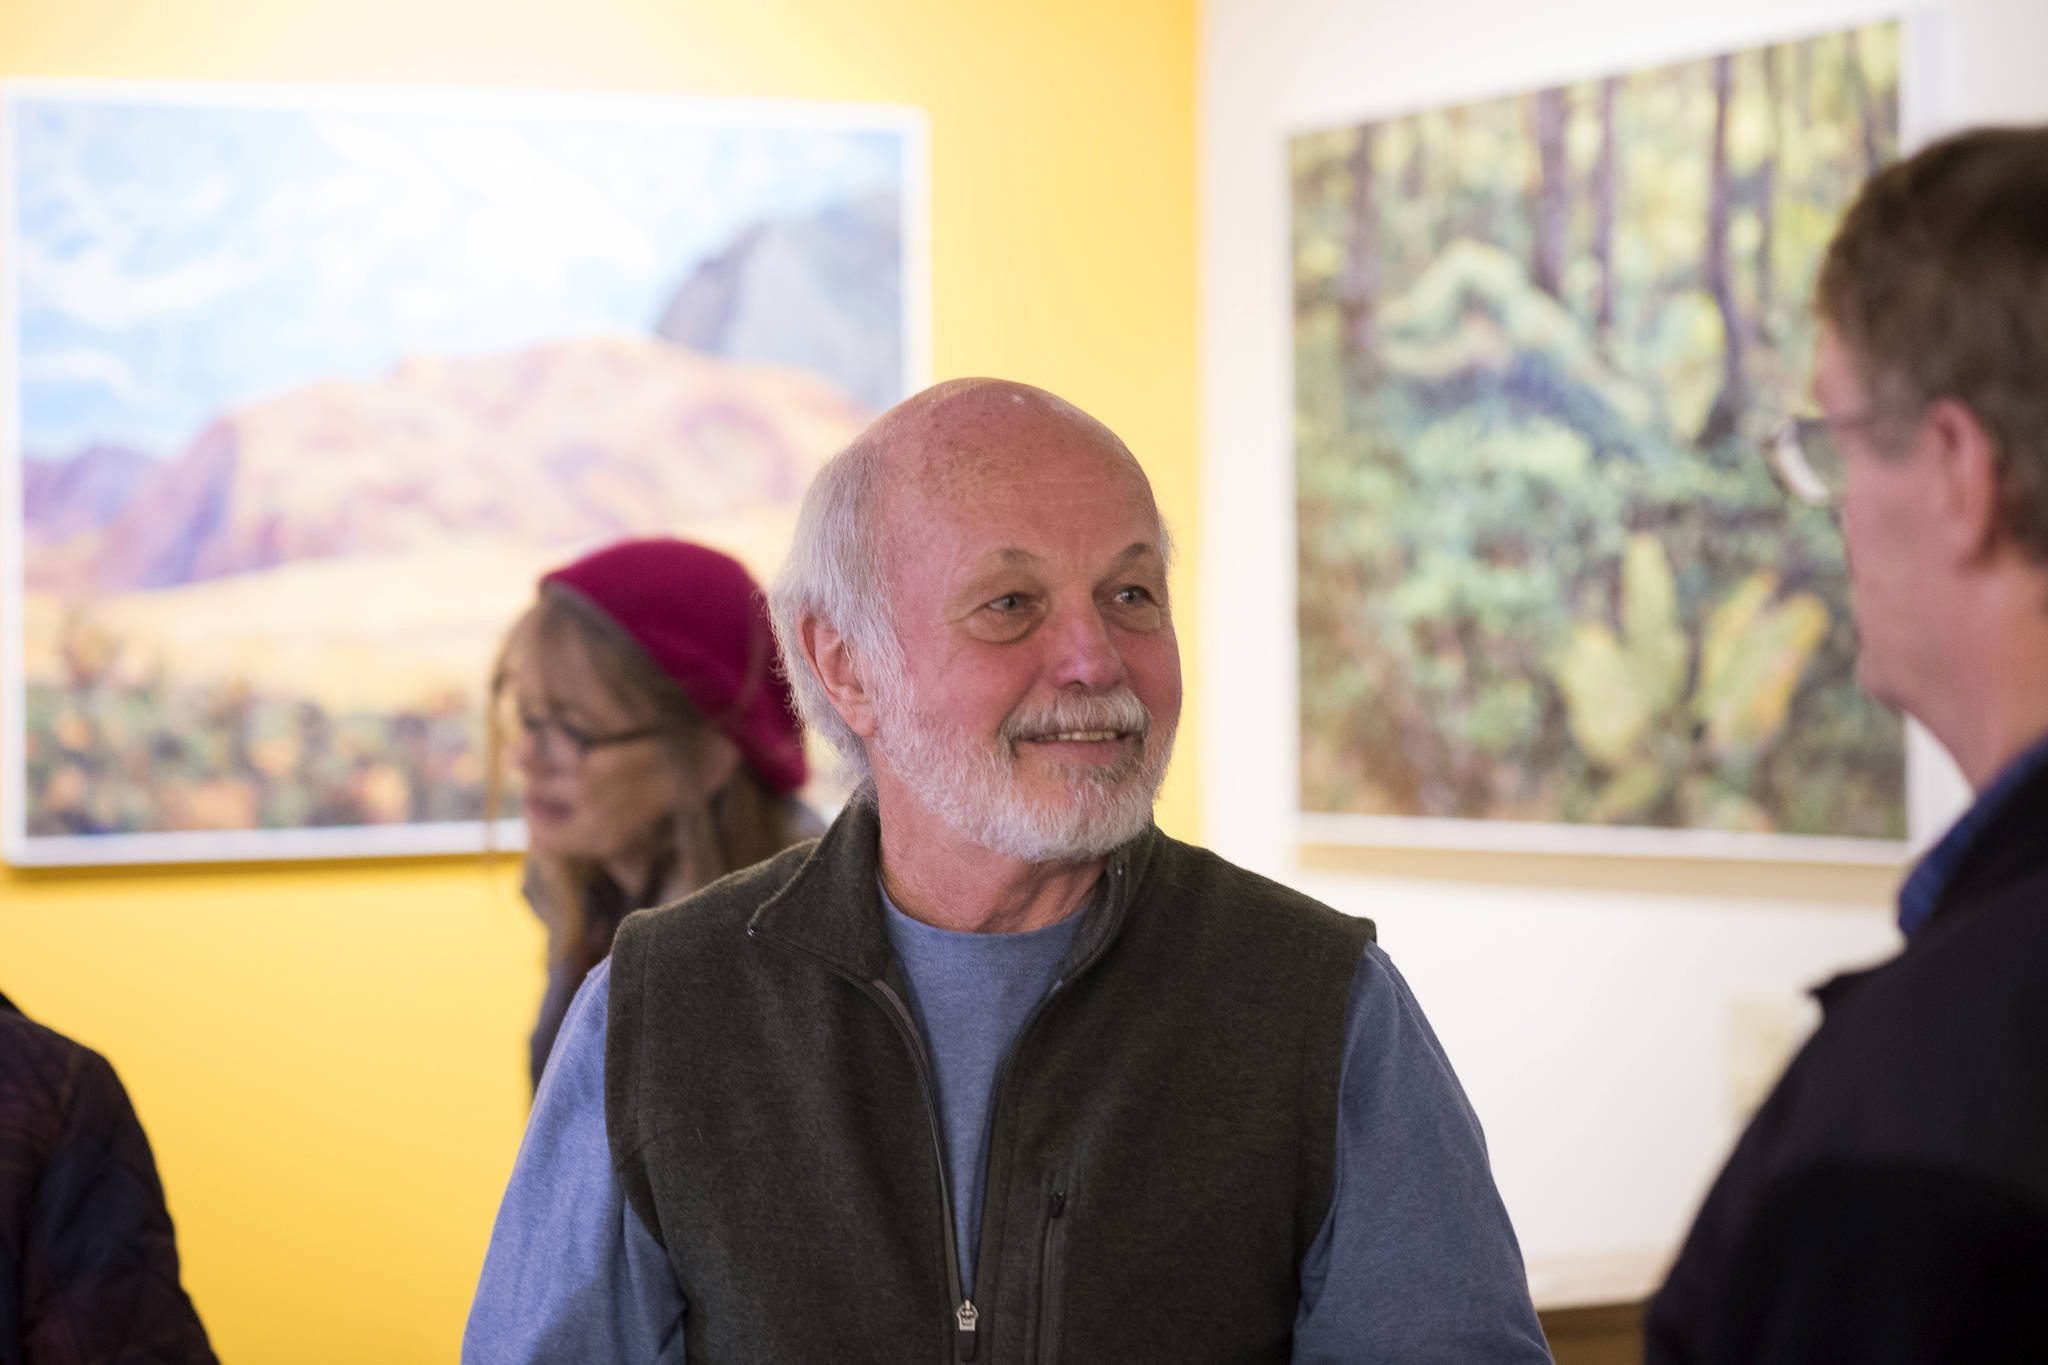 Jim Fowler talks about his new landscape paintings at Coppa during Gallery Walk on Friday, Dec. 7, 2018. (Michael Penn | Juneau Empire)